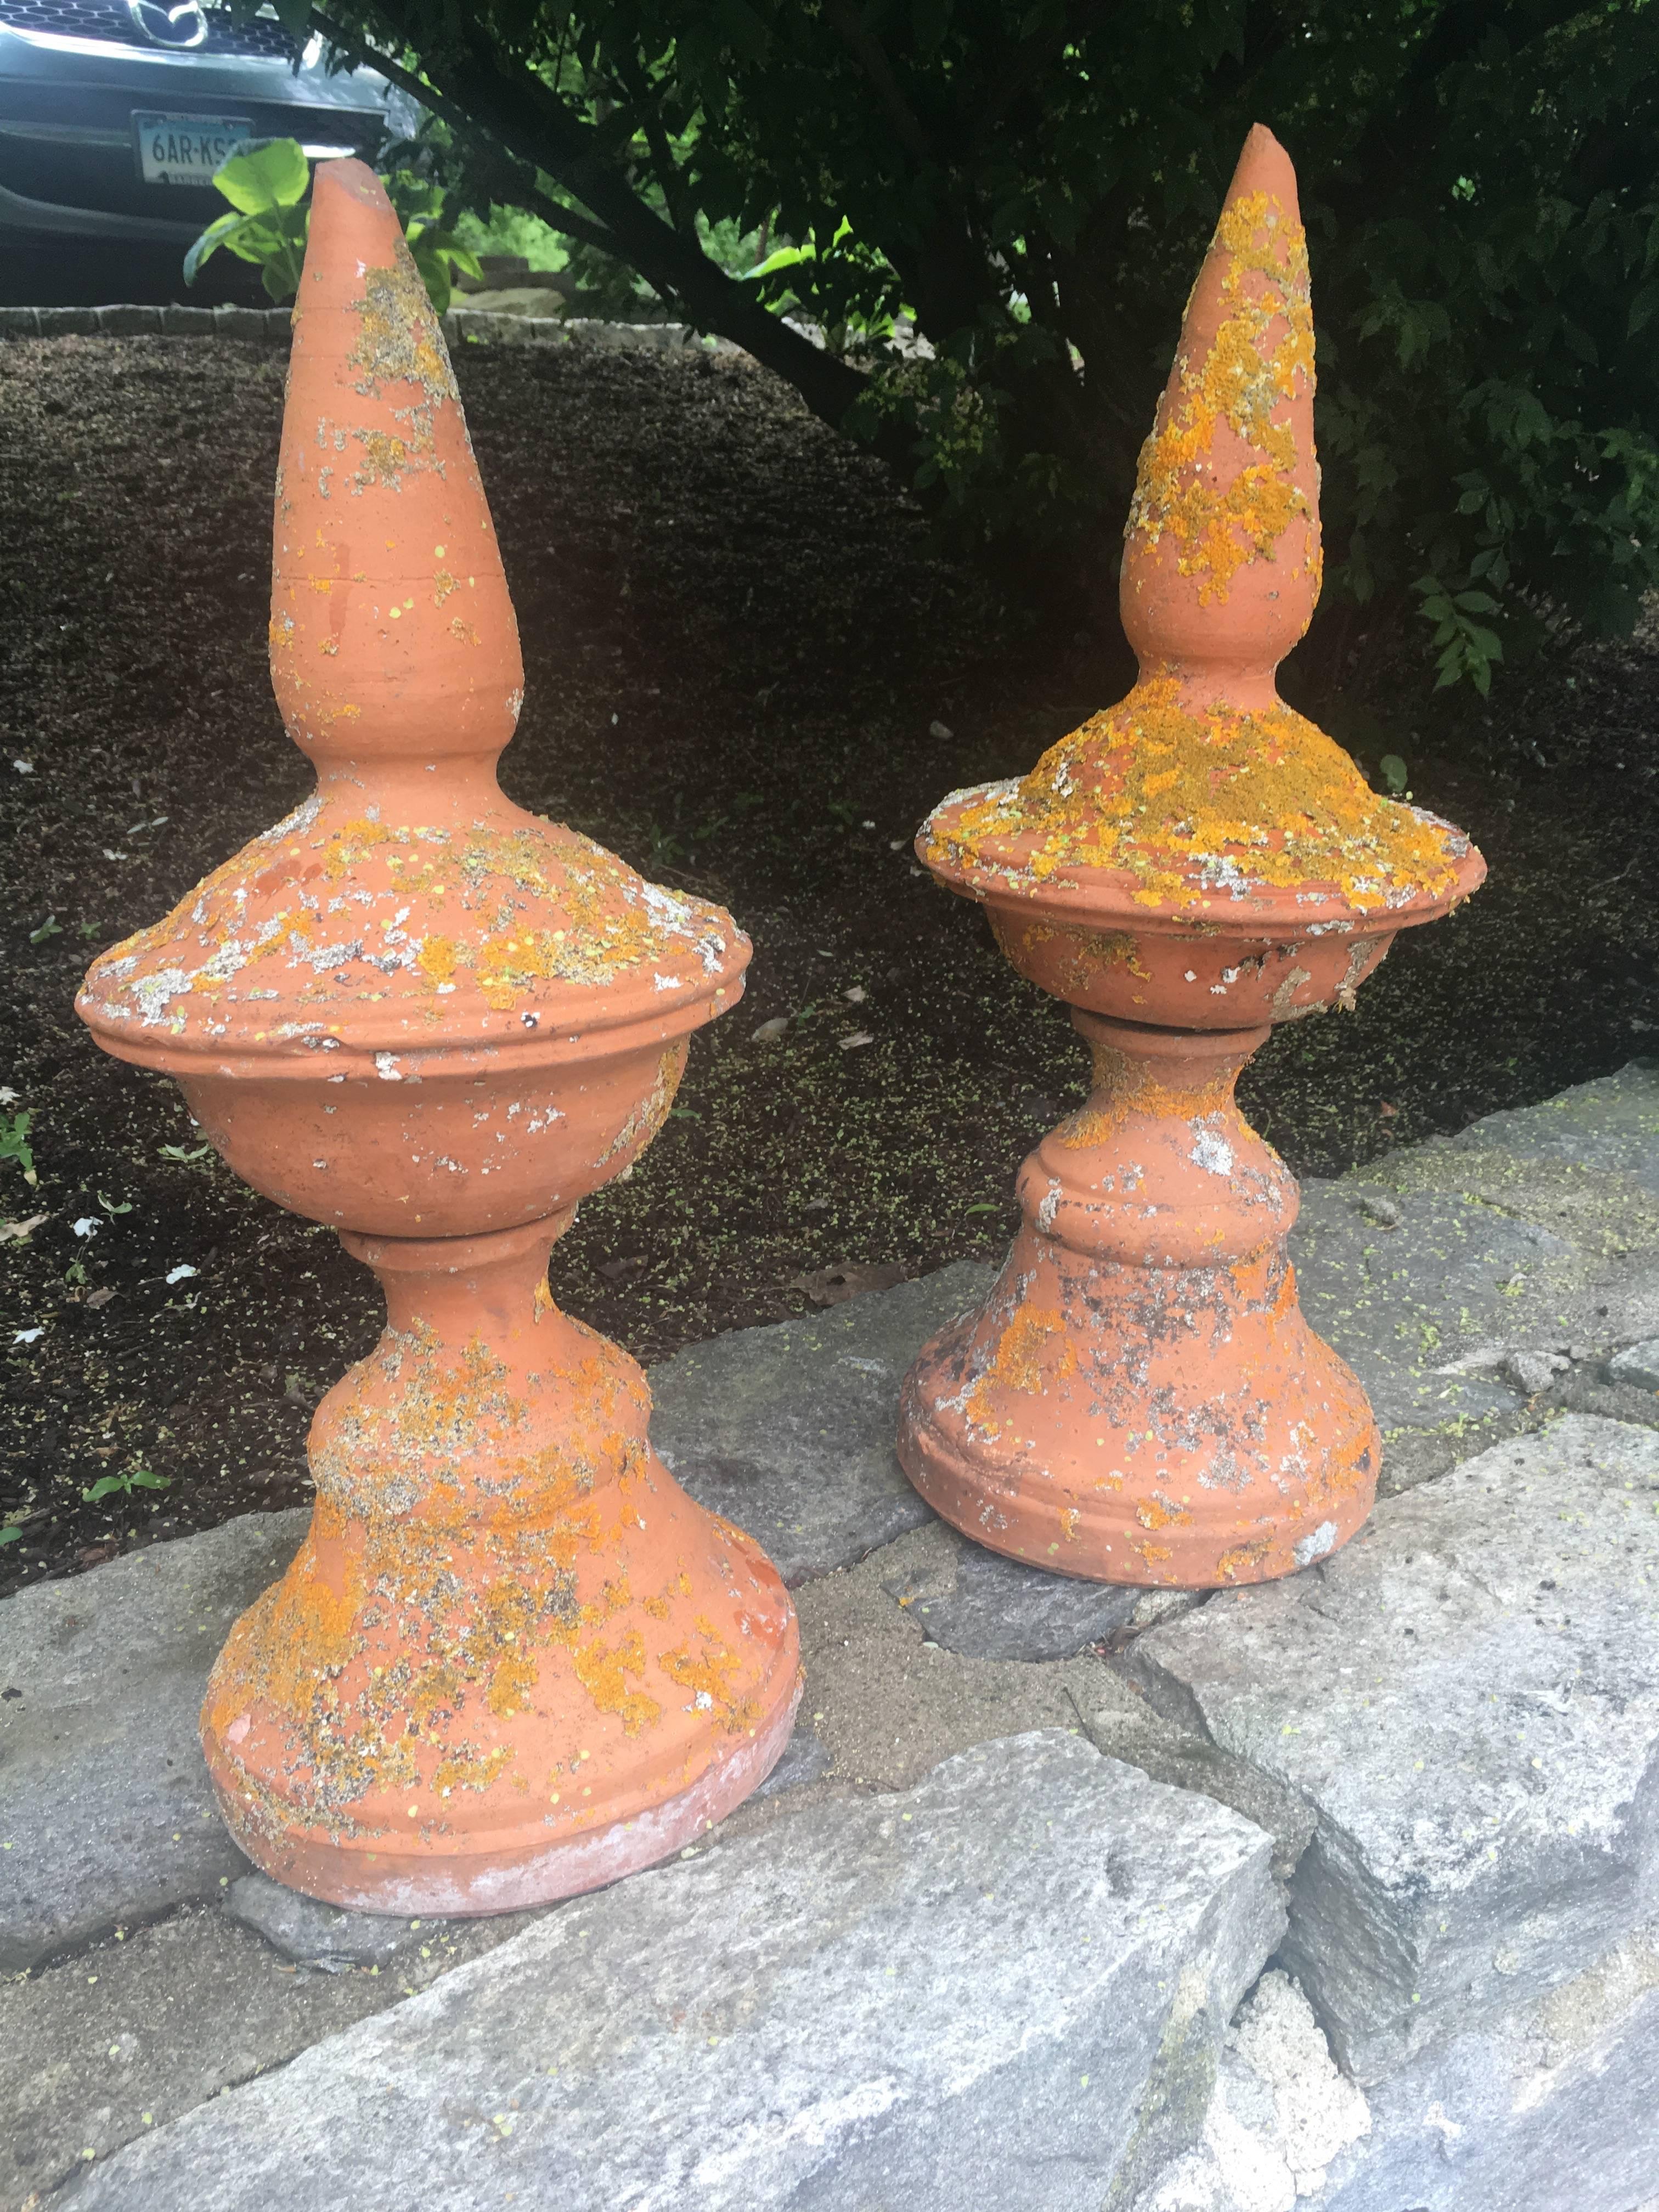 This beautiful pair of French terracotta finials has the most luscious orange lichened surface and would be perfect flanking a doorway, atop gate piers, or indie on a coffee table or mantlepiece. Both are in excellent age-appropriate condition, with